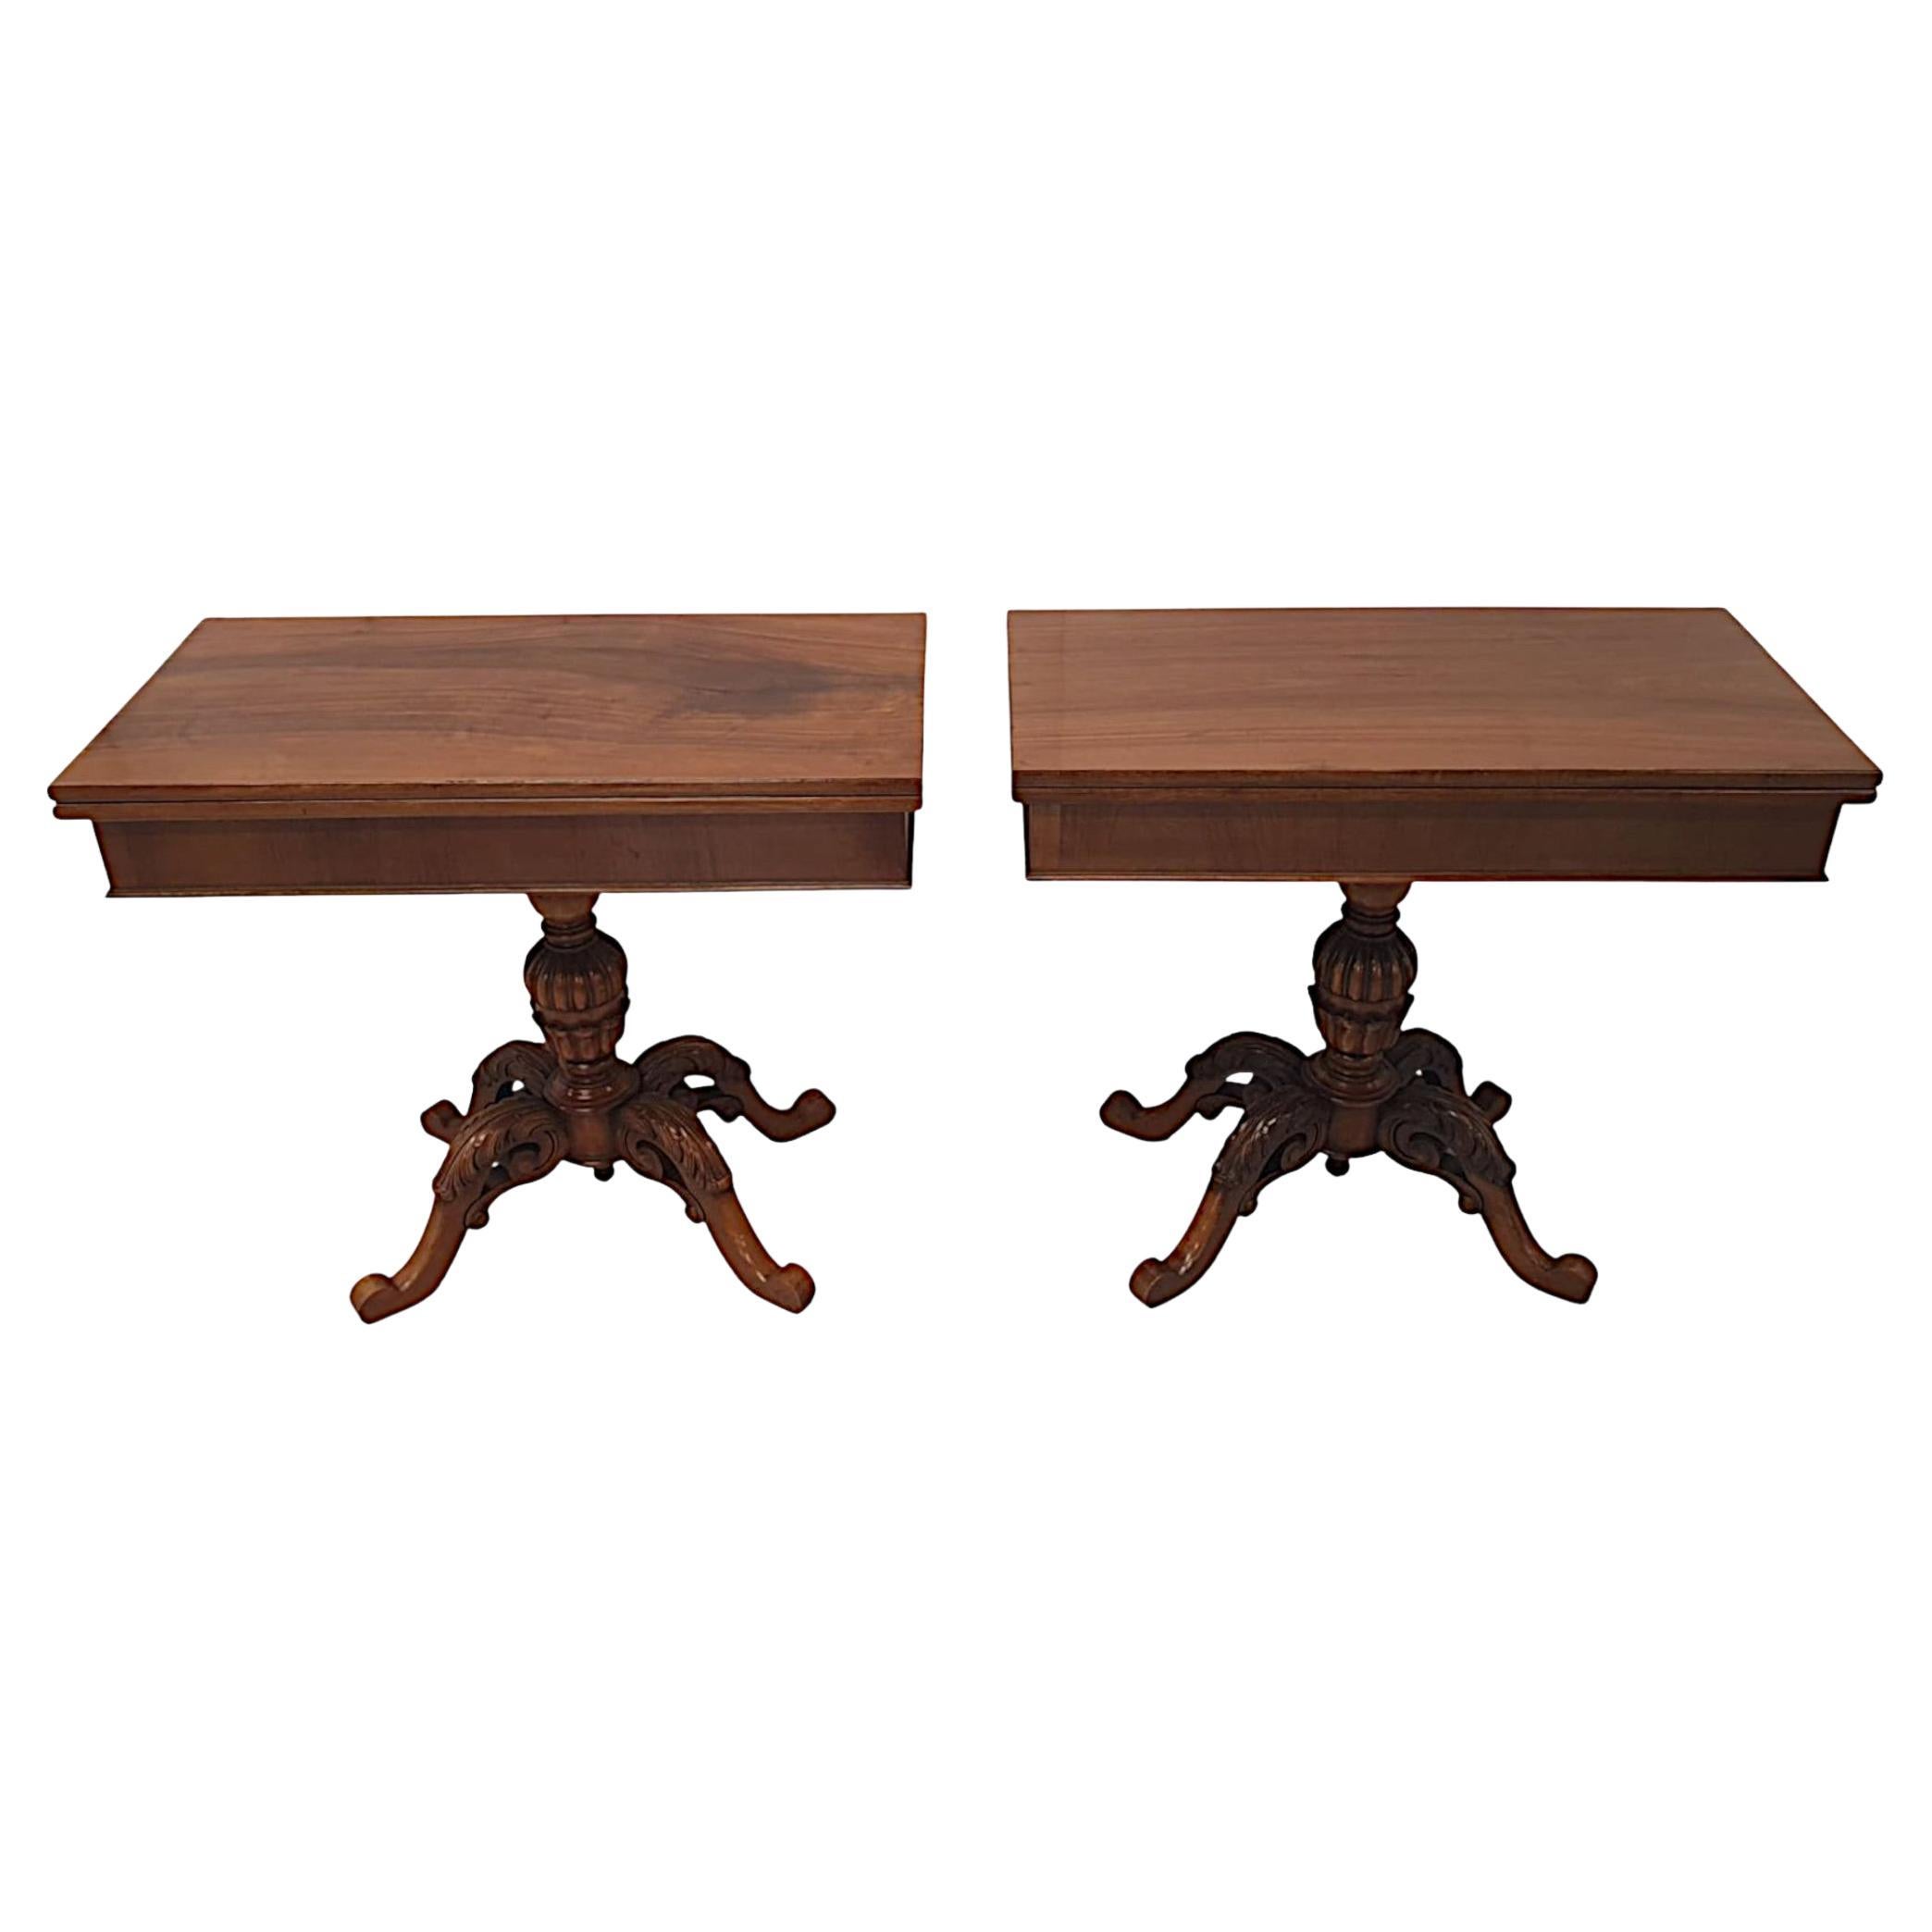 Superb Pair of Early 20th Century Turn over Leaf Card Tables